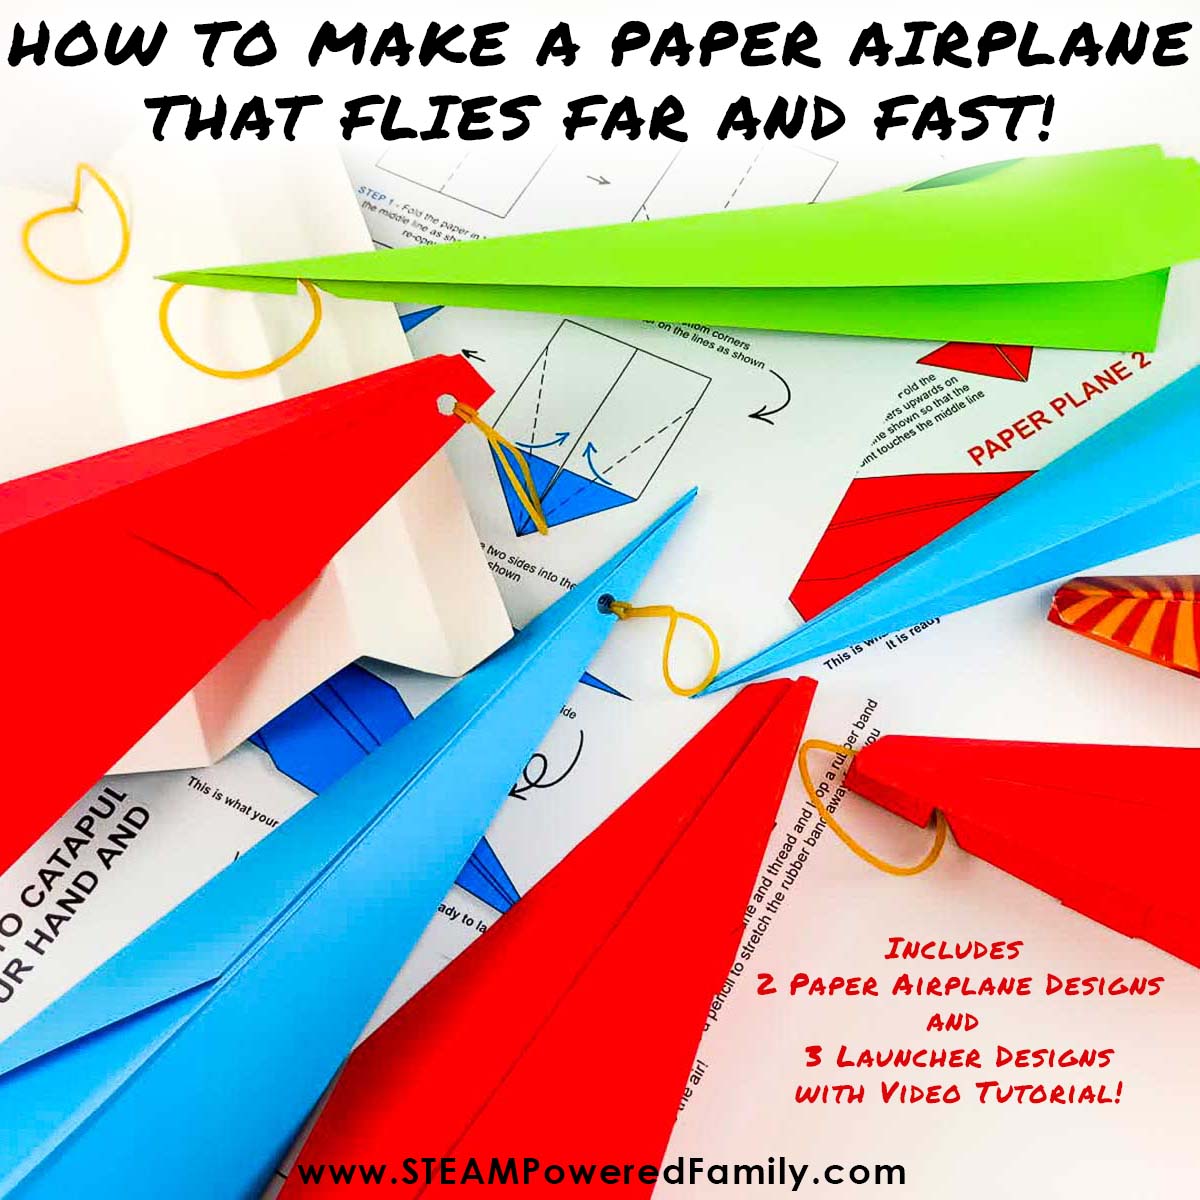 How to Make a Paper Airplane with Launcher that Flies Far